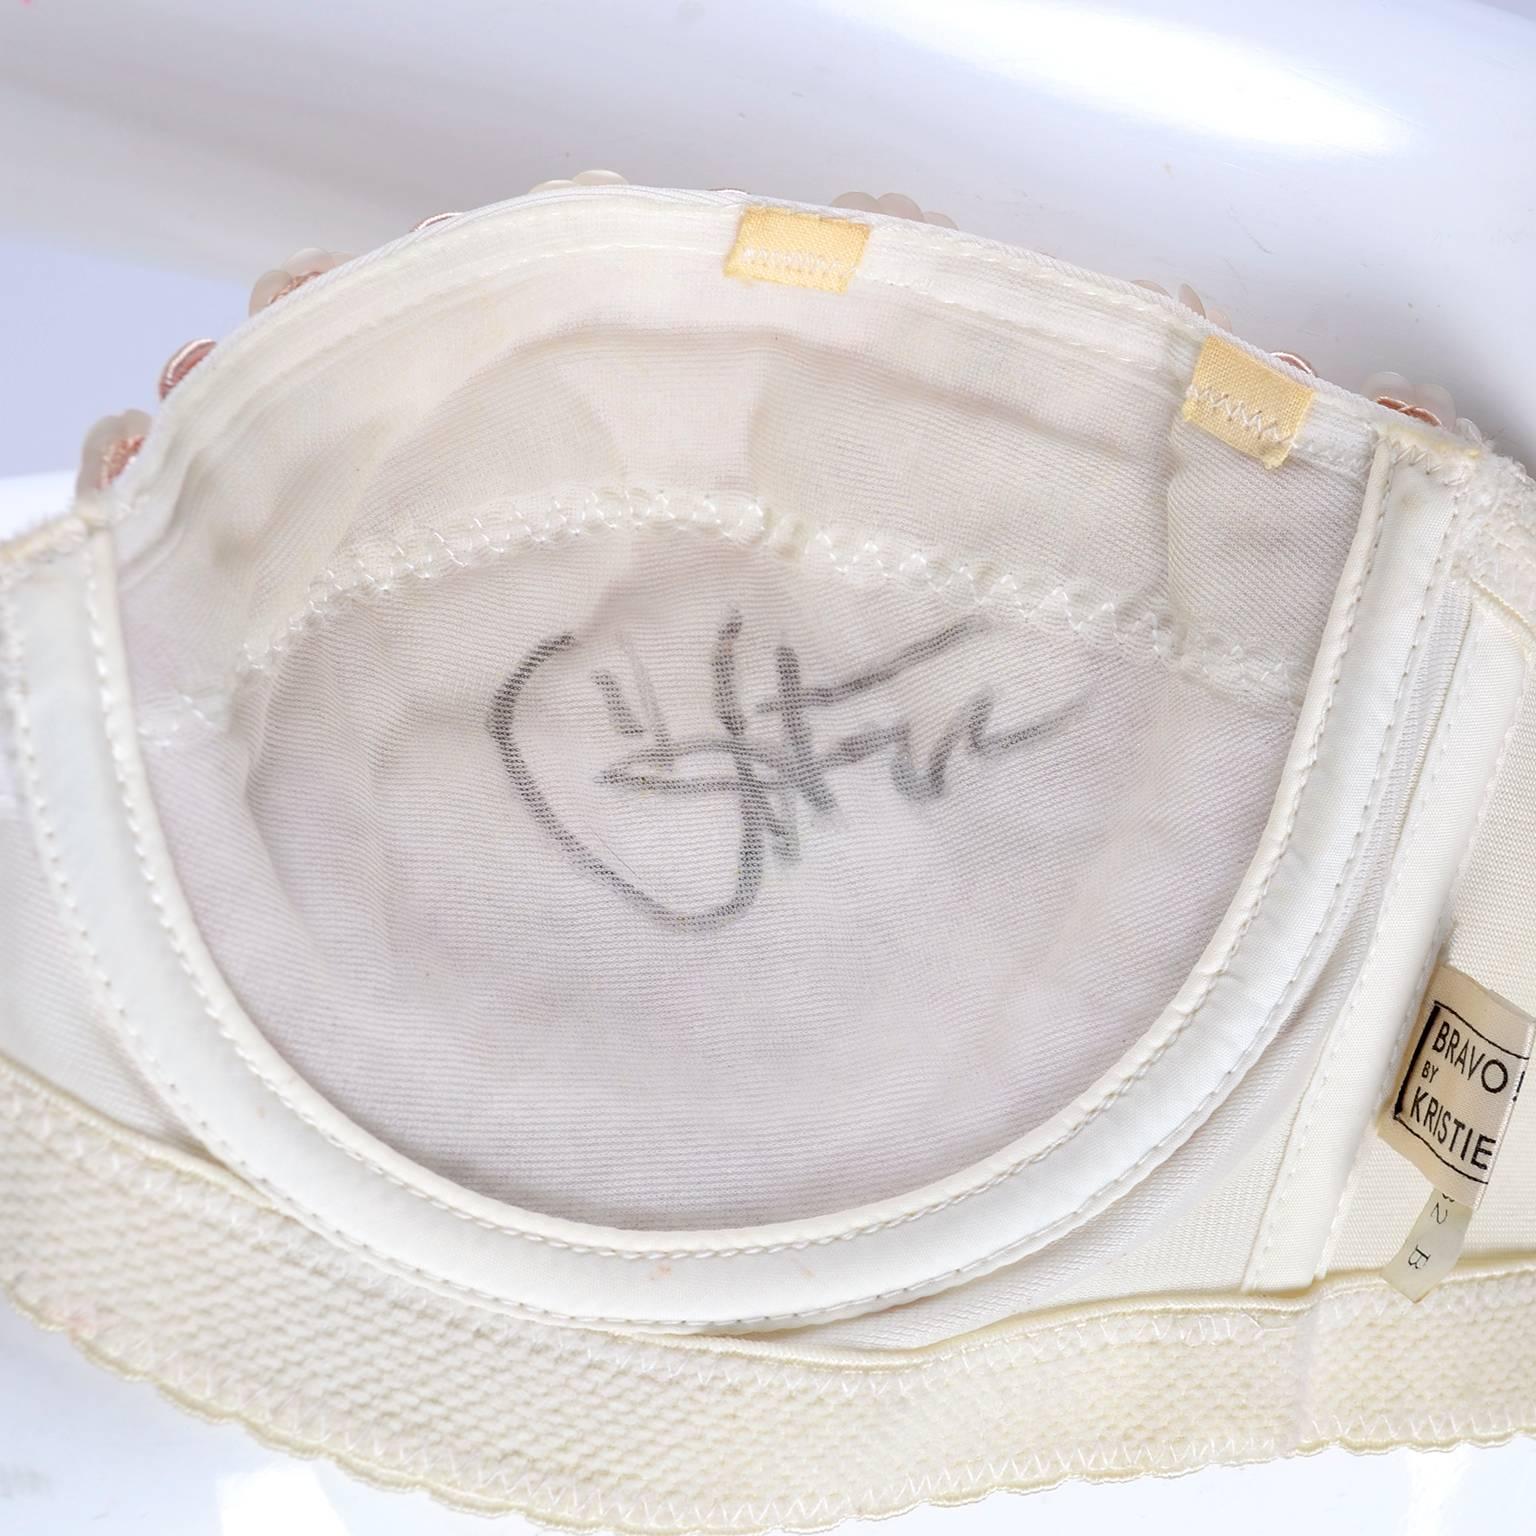 This strapless bra came from a Cher memorabilia collection that we acquired from a collector.  The bra is signed by Cher inside of the cup and the label reads: Bravo! by Kristie. The bra is cream with pink soutache trim, pink sequins, and pink